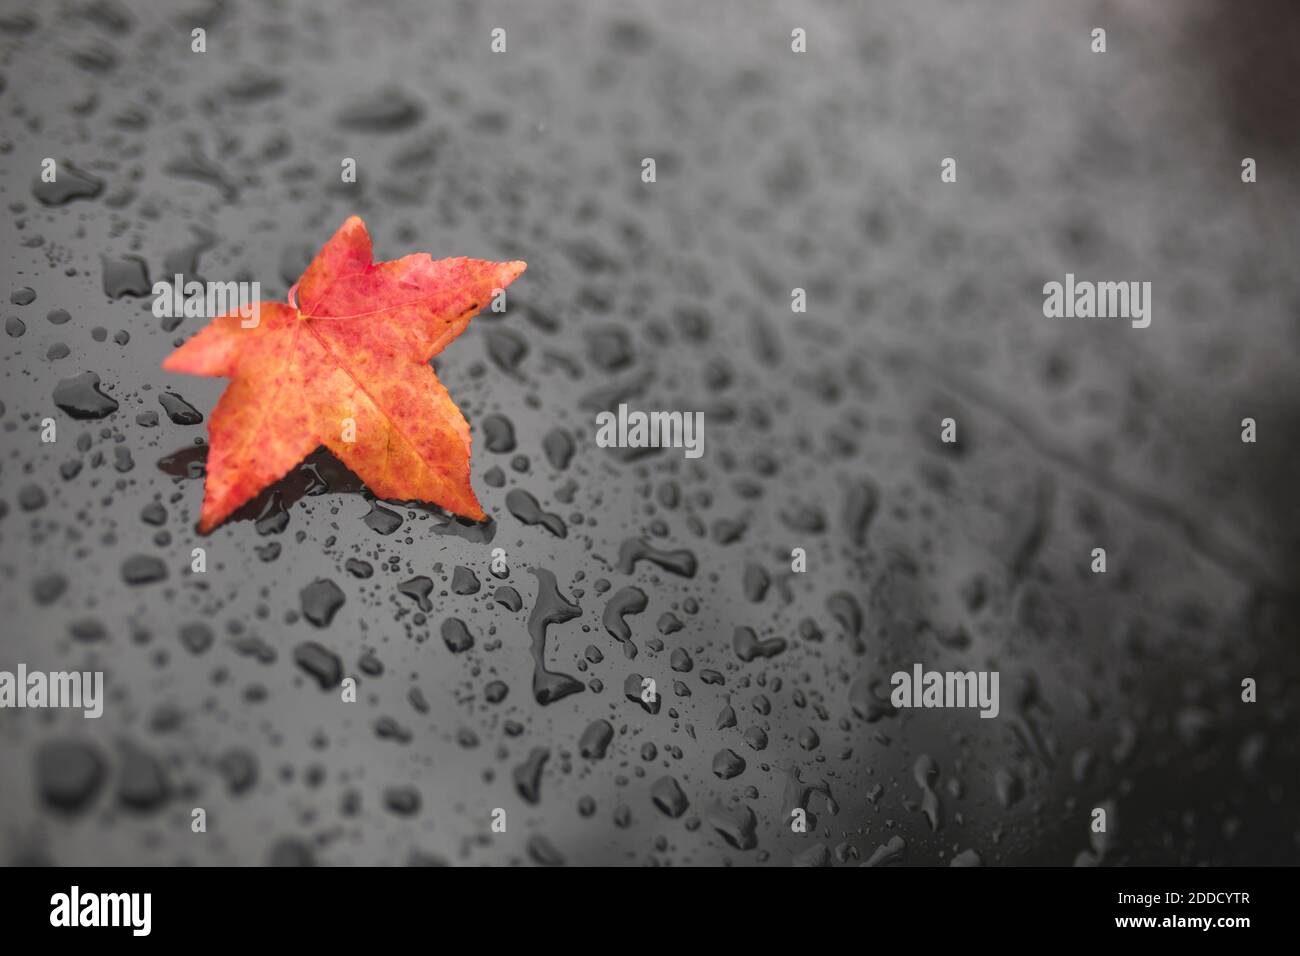 Germany, Brandenburg, Potsdam, Red autumn leaf lying on black surface covered in raindrops Stock Photo